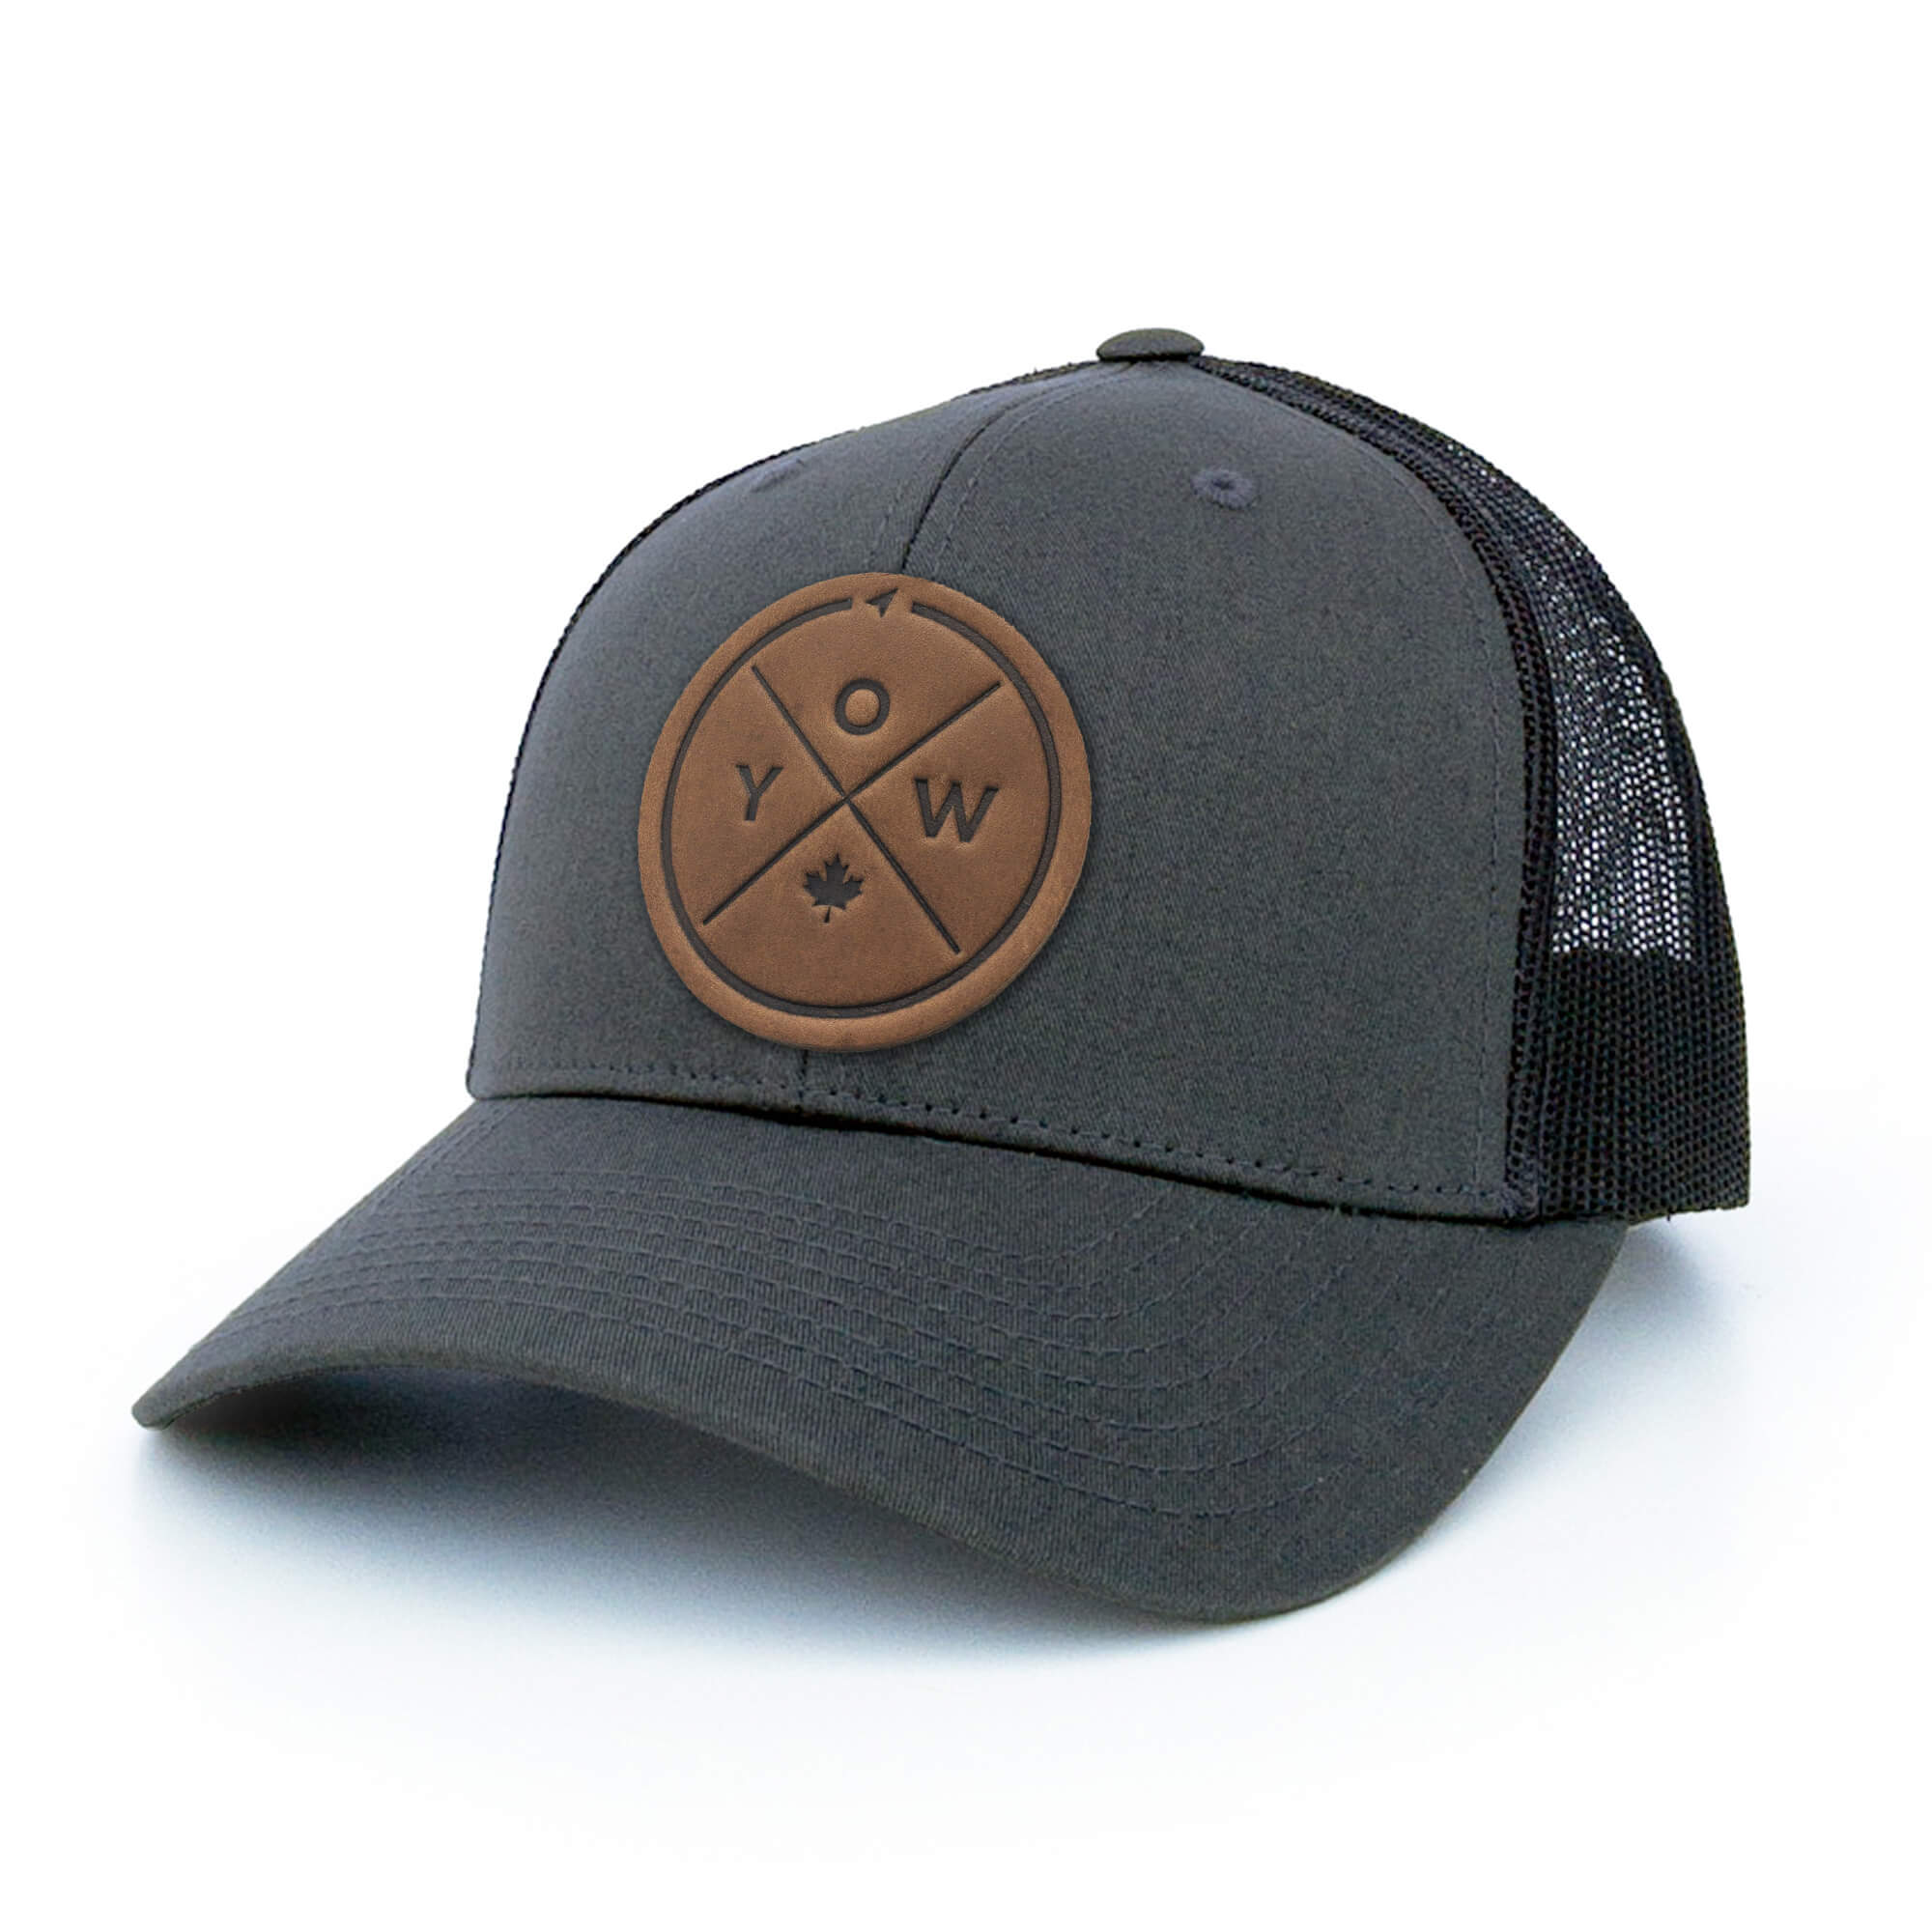 Charcoal trucker hat with full-grain leather patch with YOW embossing | BLACK-002-008, CHARC-002-008, NAVY-002-008, HGREY-002-008, MOSS-002-008, BROWN-002-008